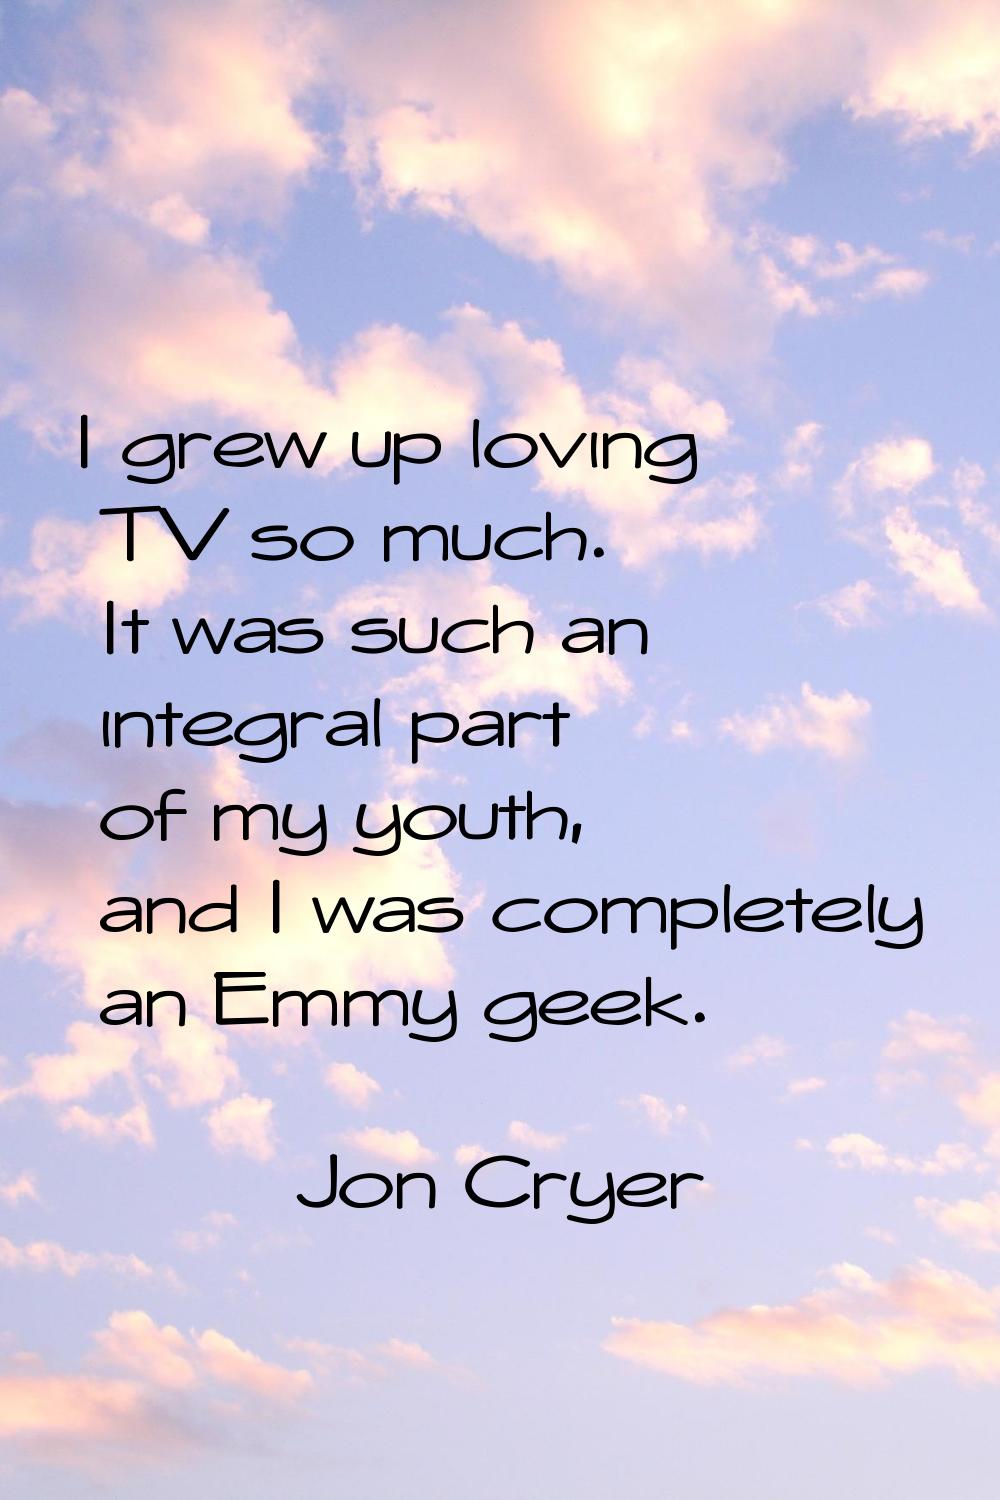 I grew up loving TV so much. It was such an integral part of my youth, and I was completely an Emmy